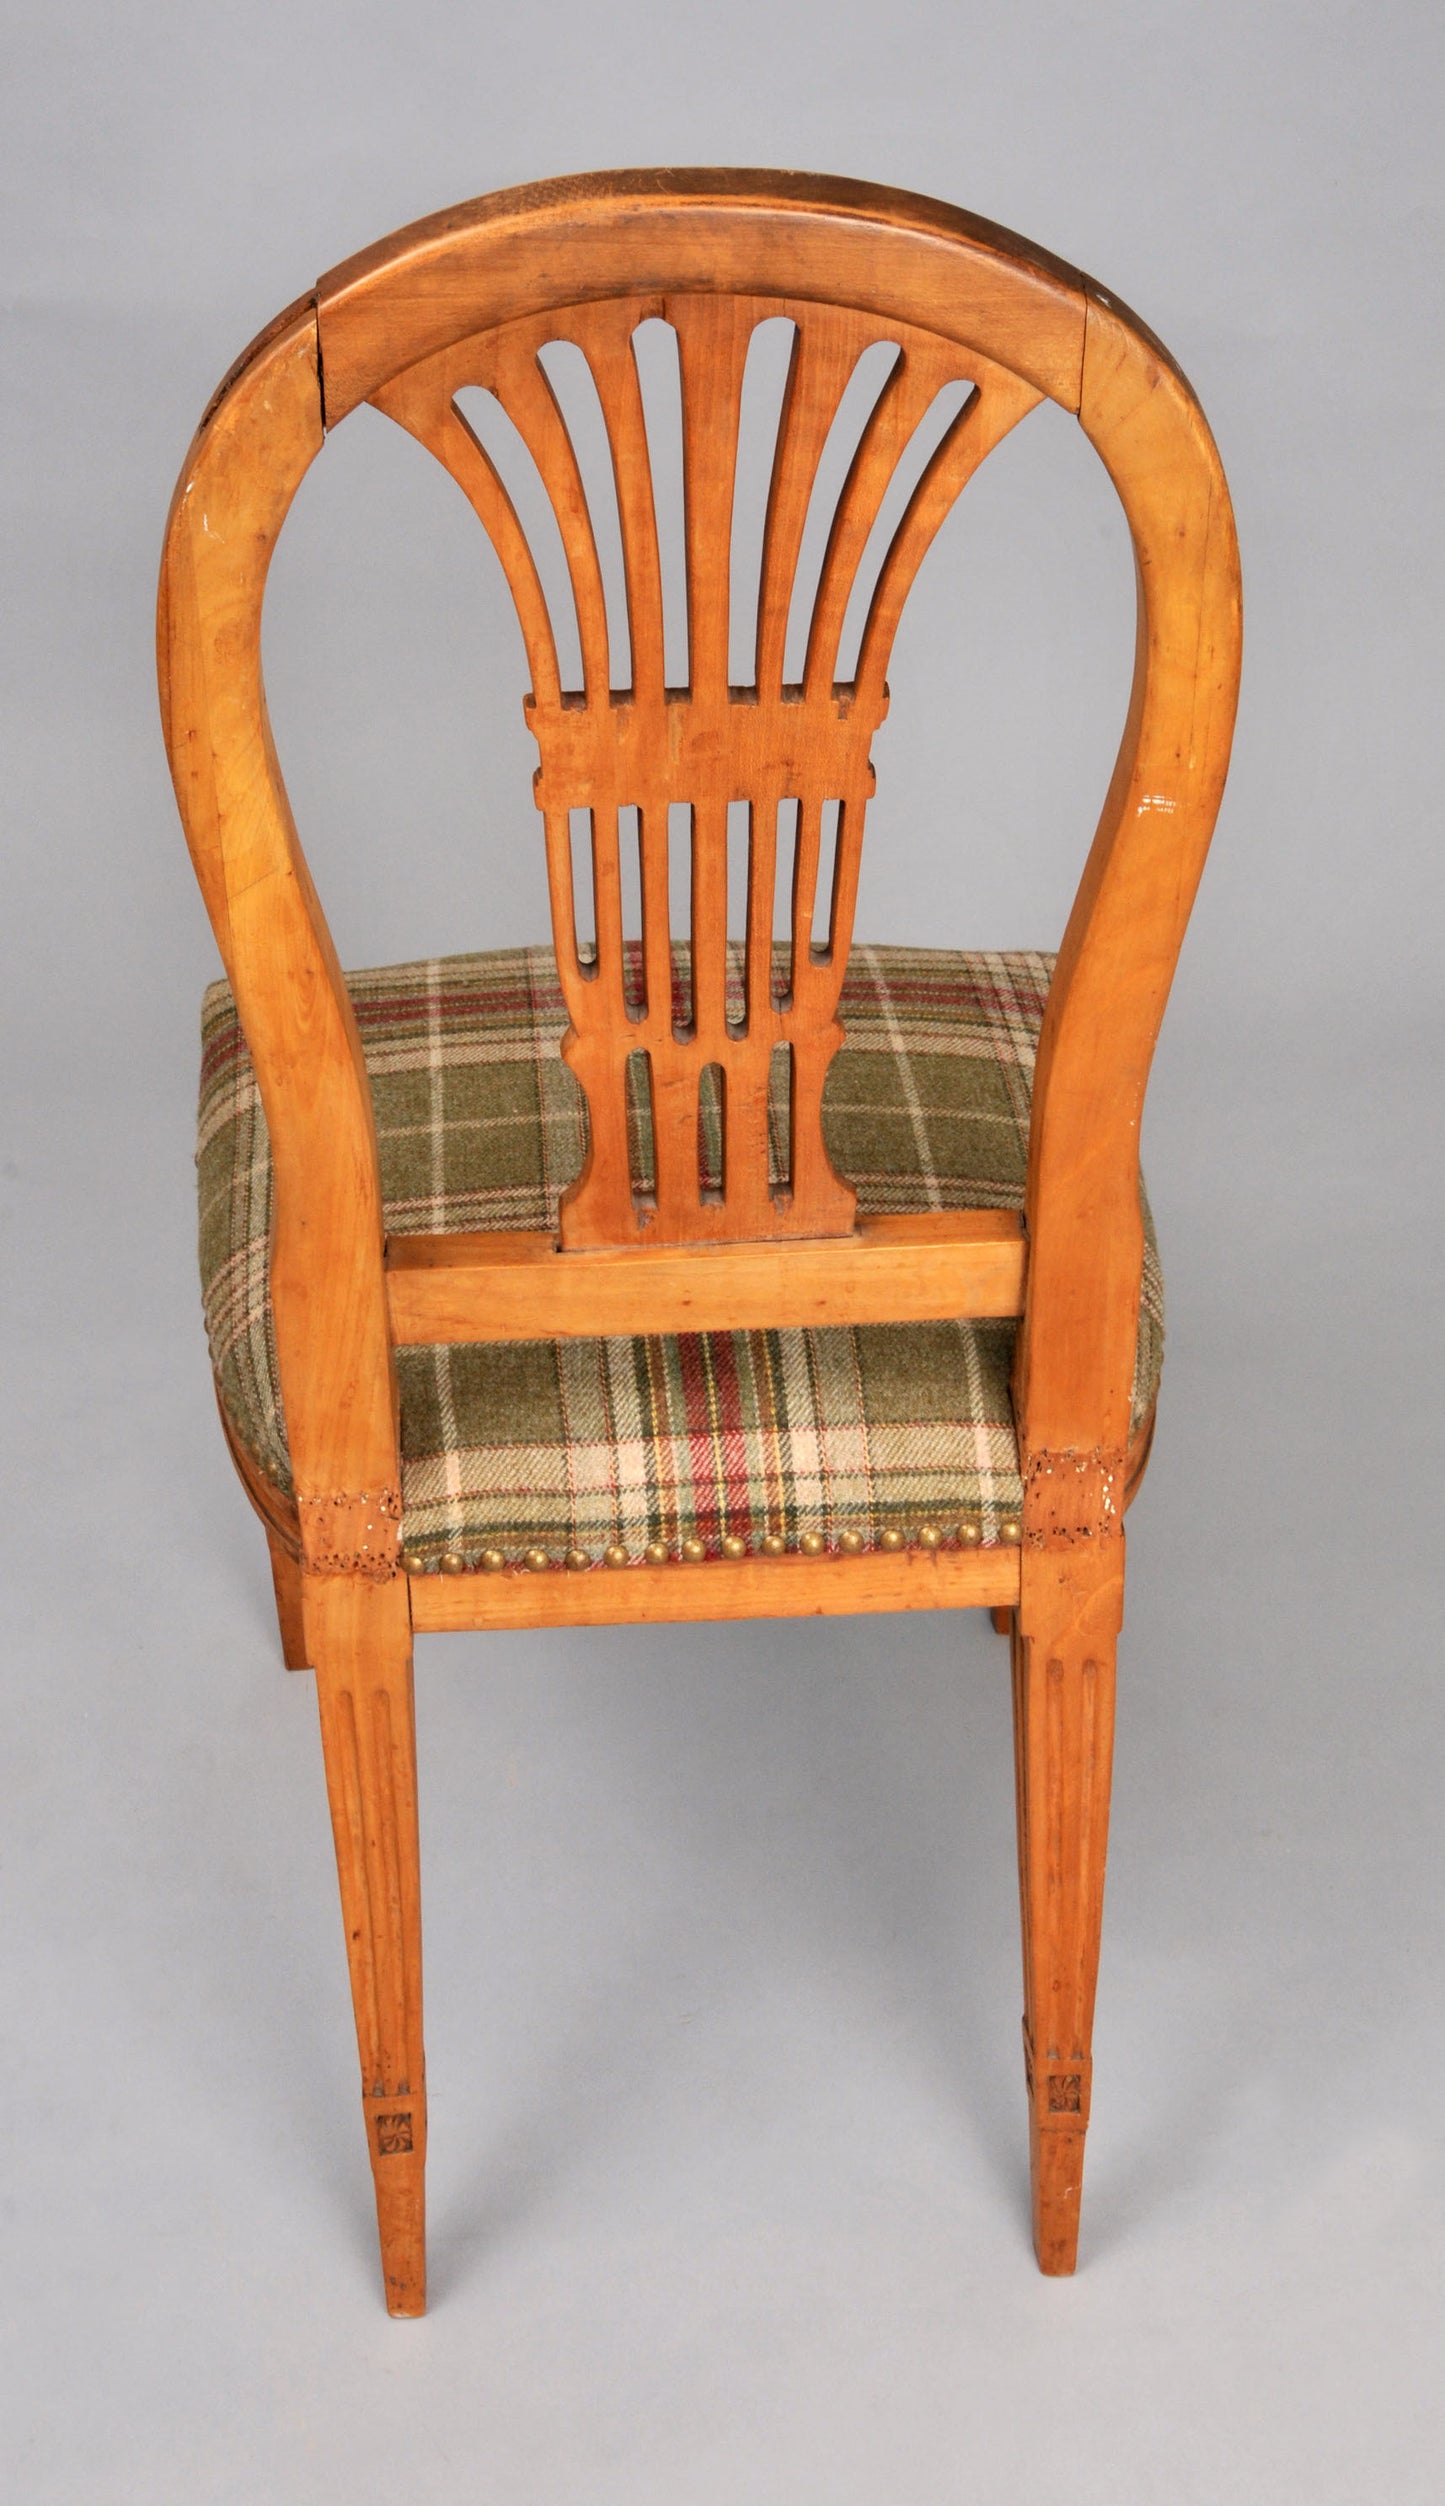 4 side chairs Louis Seize* - 18th/19th century century